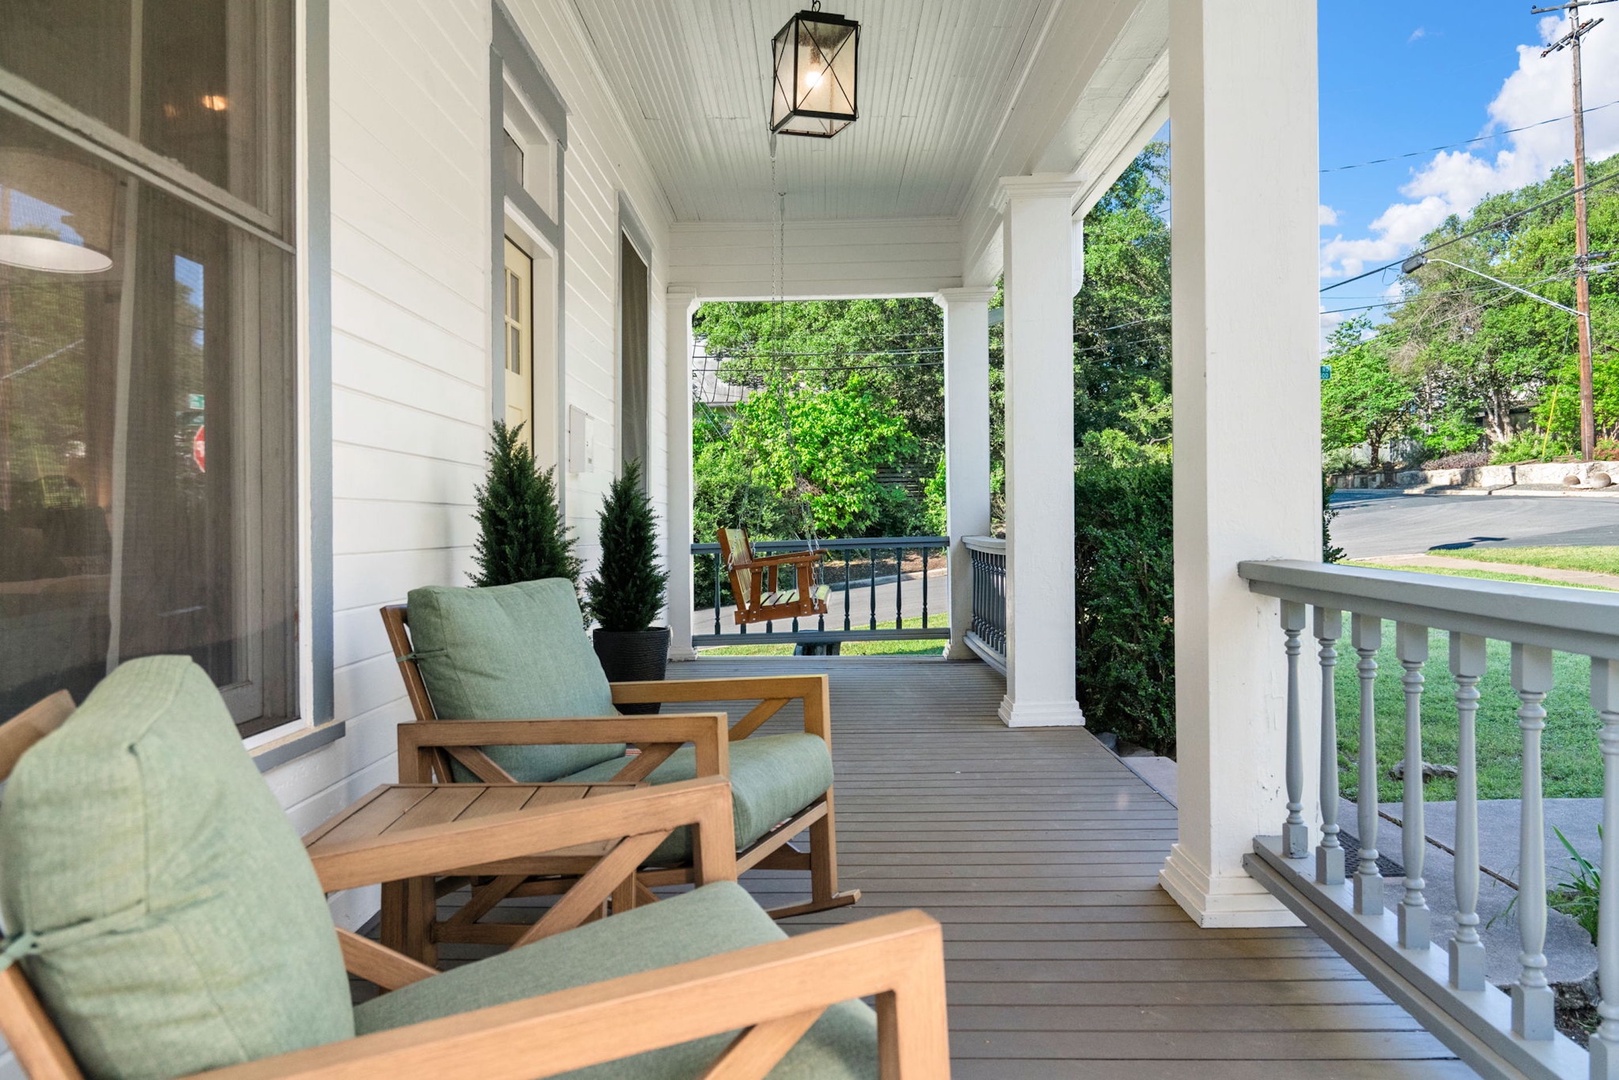 Relax & watch the world go by from the tranquil front porch